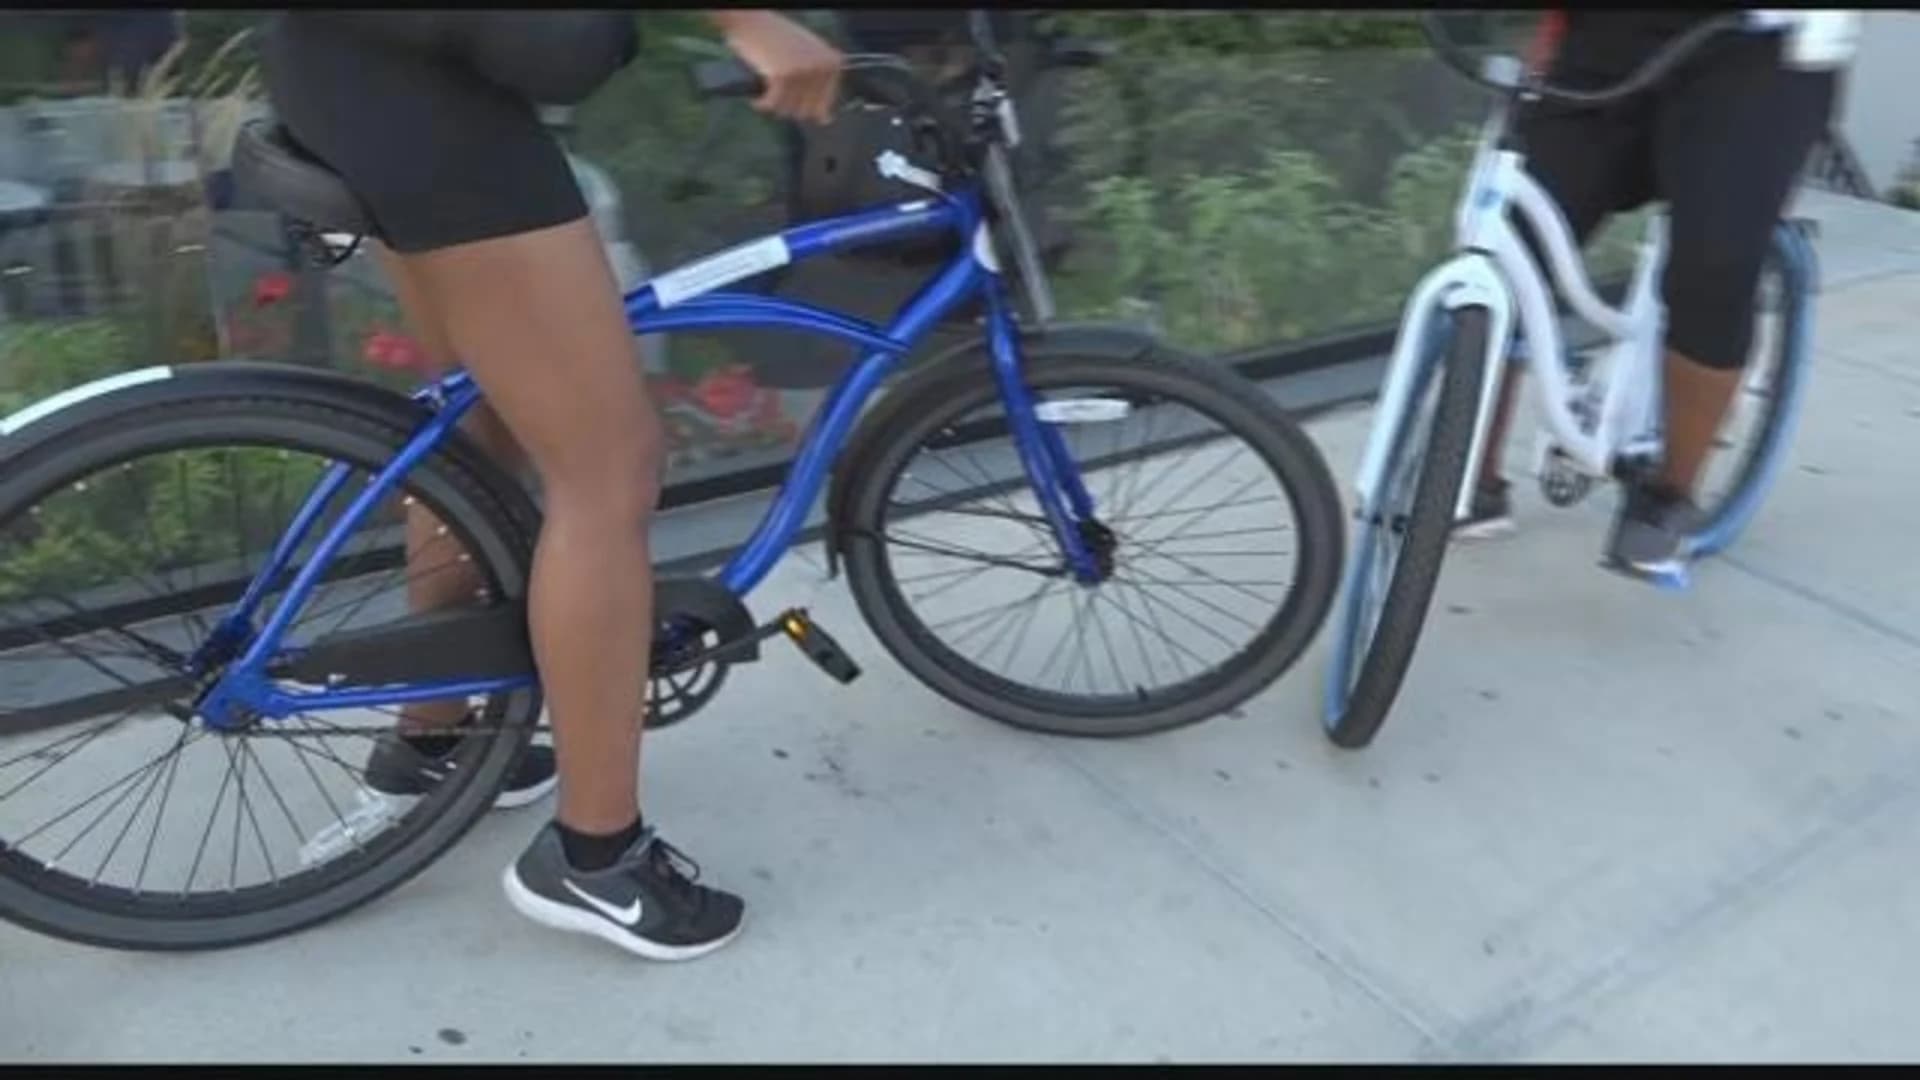 Drink company gives away bikes as part of L train promotion